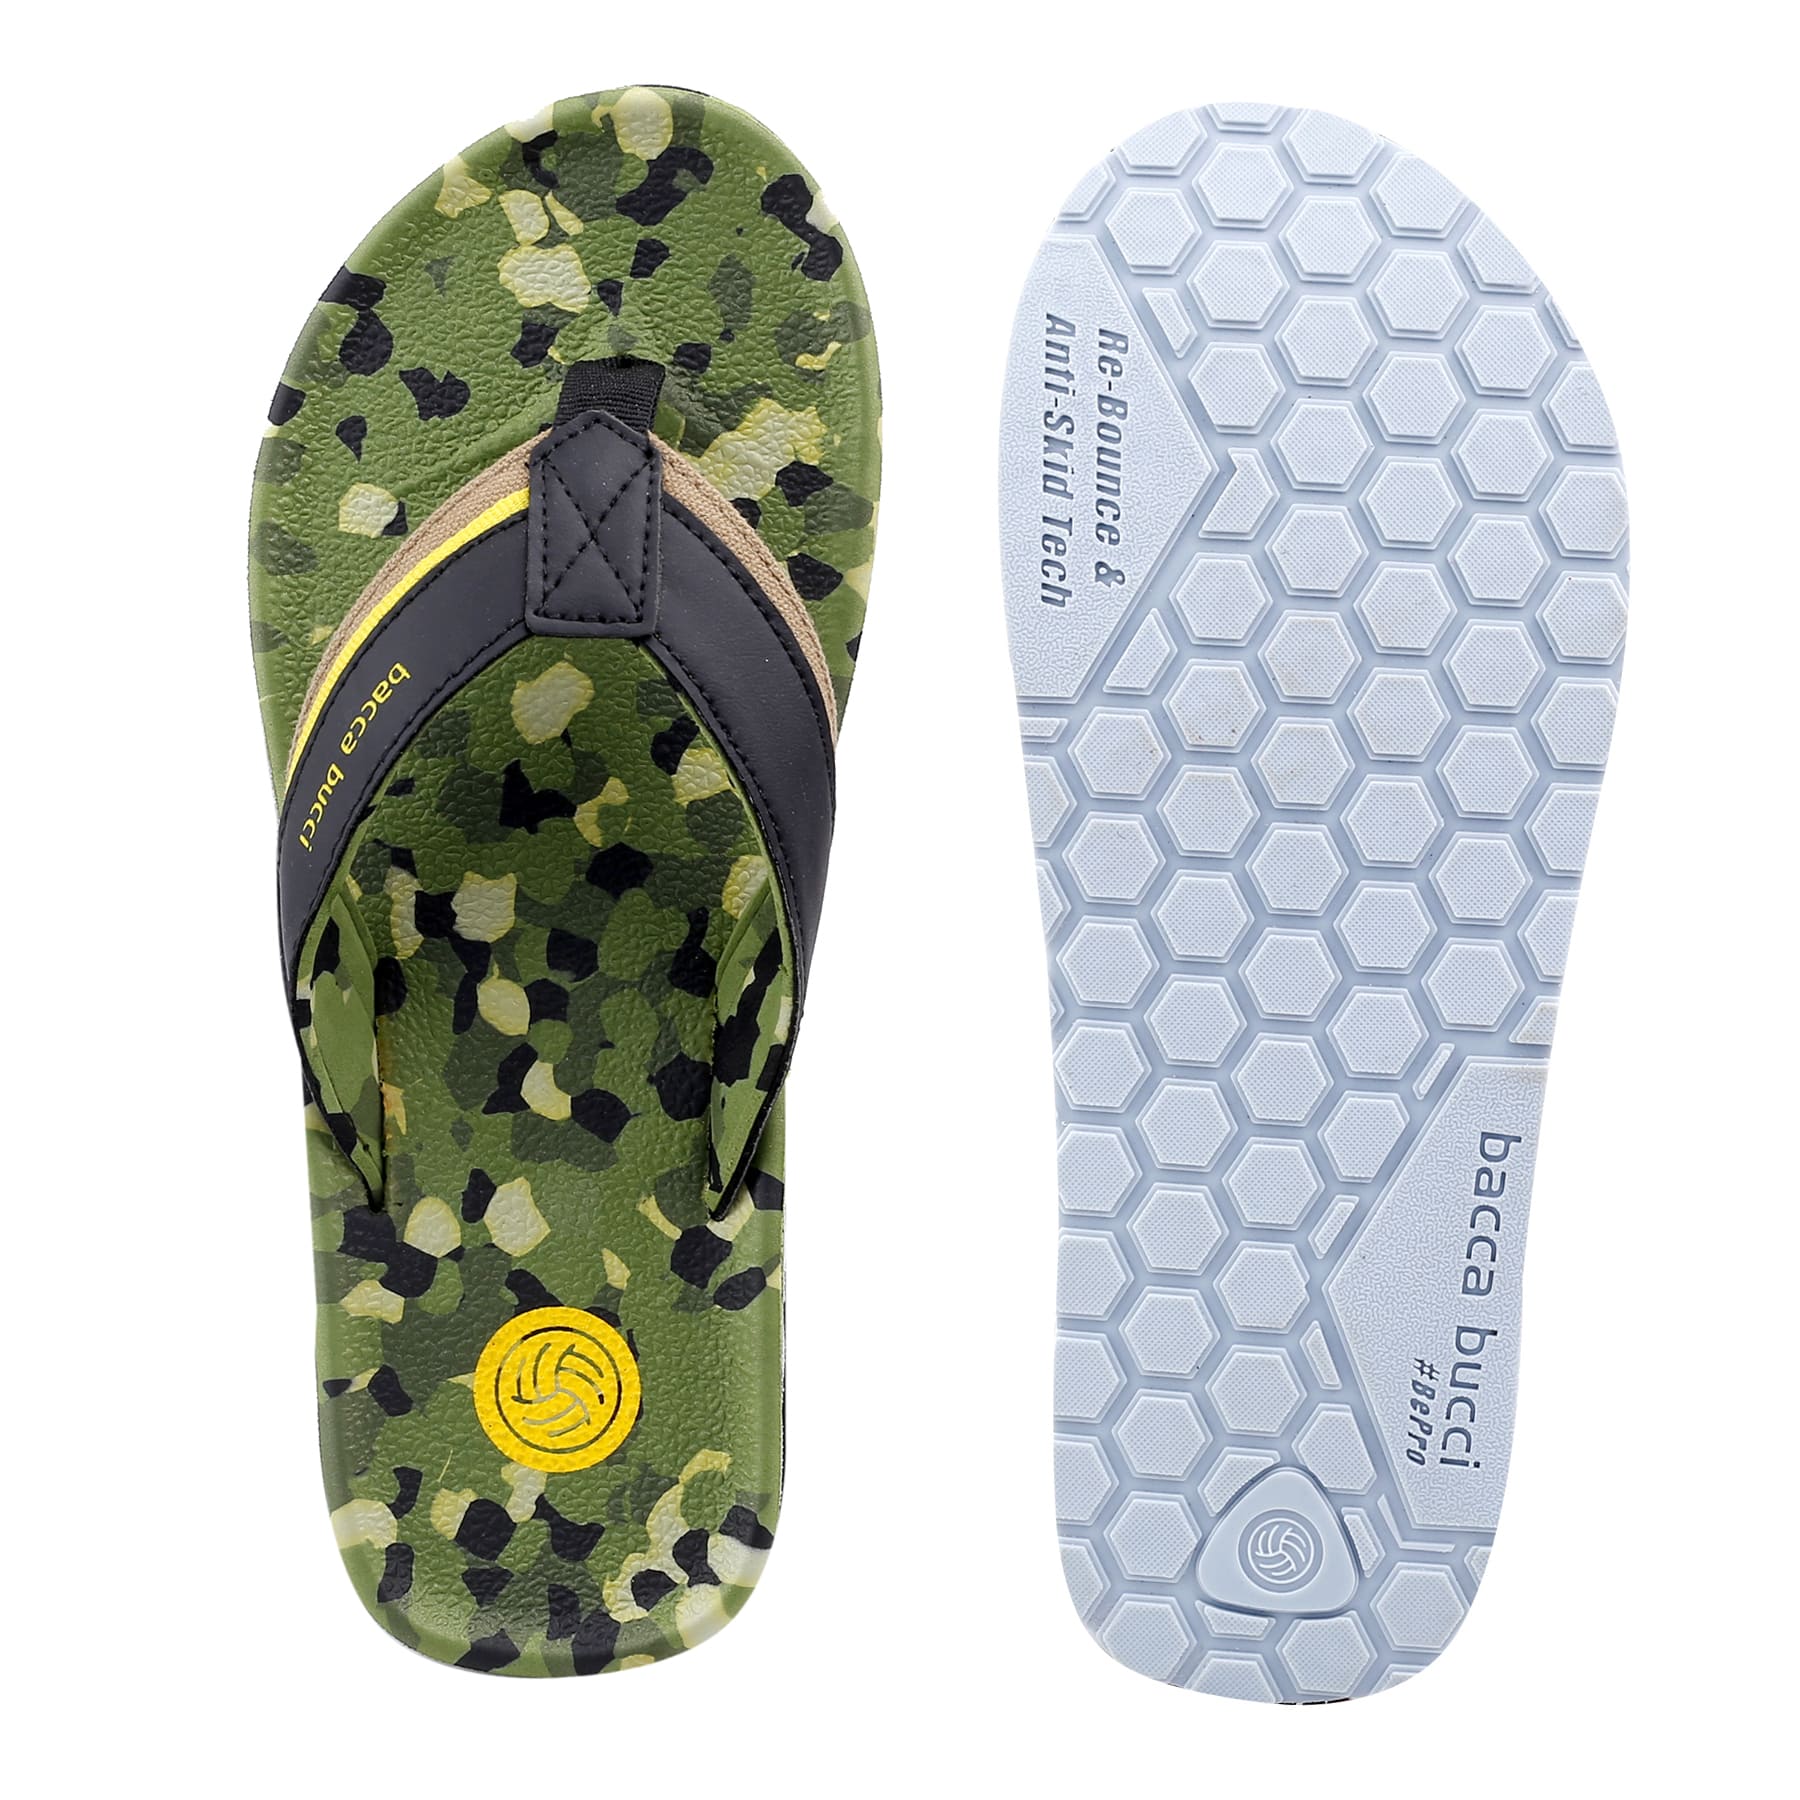 Bacca Bucci MILITARY Sports Slippers with Comfort Orthotic Thong Cloud Flip-Flop for Men